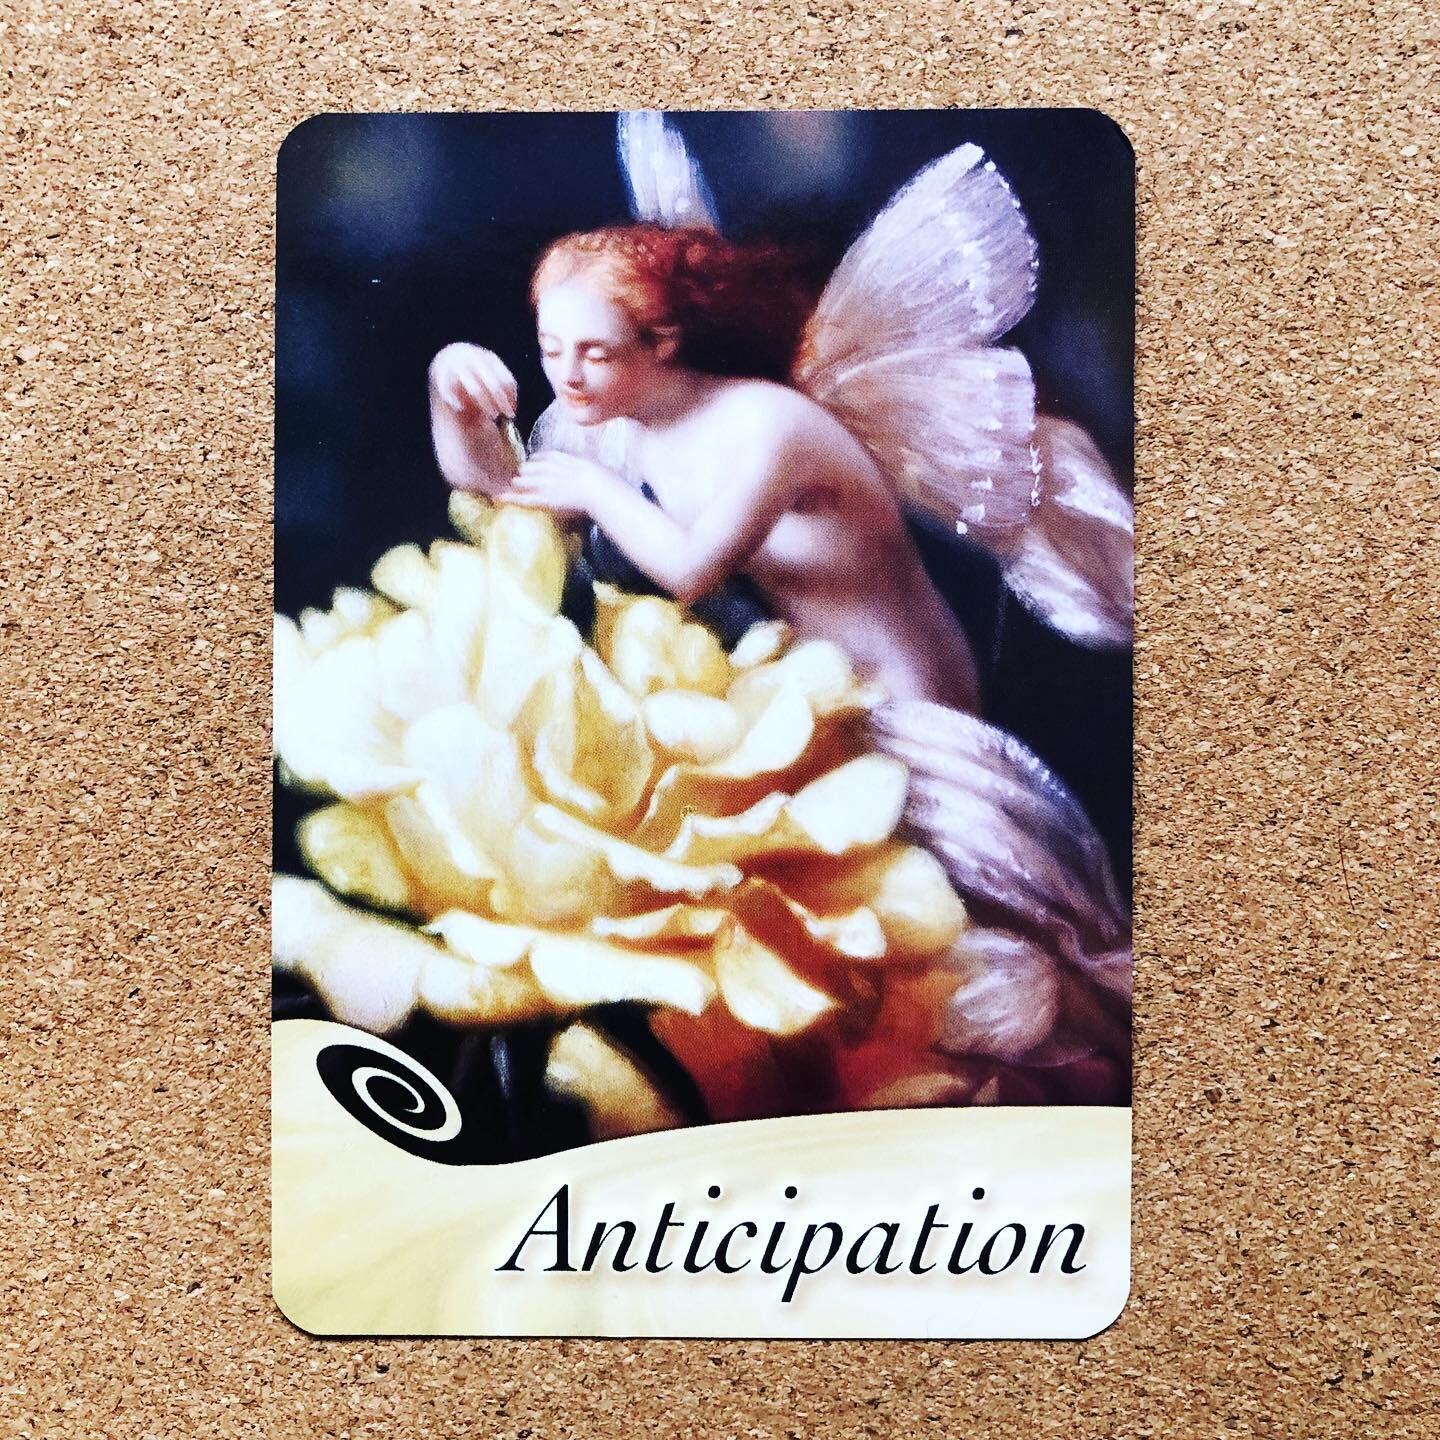 Anticipation is in the &ldquo;eye of the beholder&rdquo;. The meaning we make from it is based on the mindset of the individual.

For the past couple of years, on the first day of the year, I found inspiration from picking intention cards from a &ldq